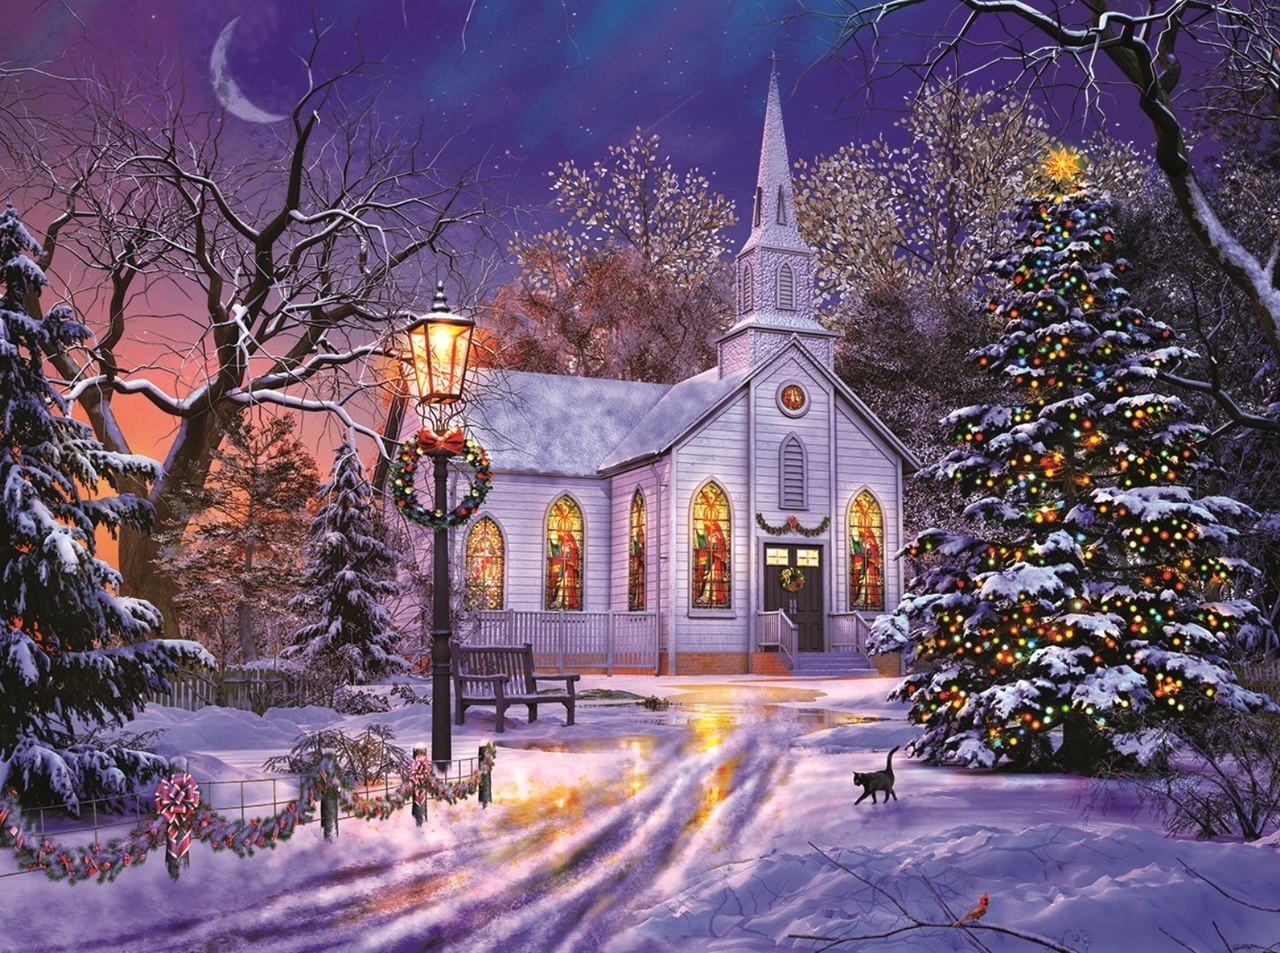 The Old Christmas Church - 1000pc Jigsaw Puzzle By Sunsout  			  					NEW